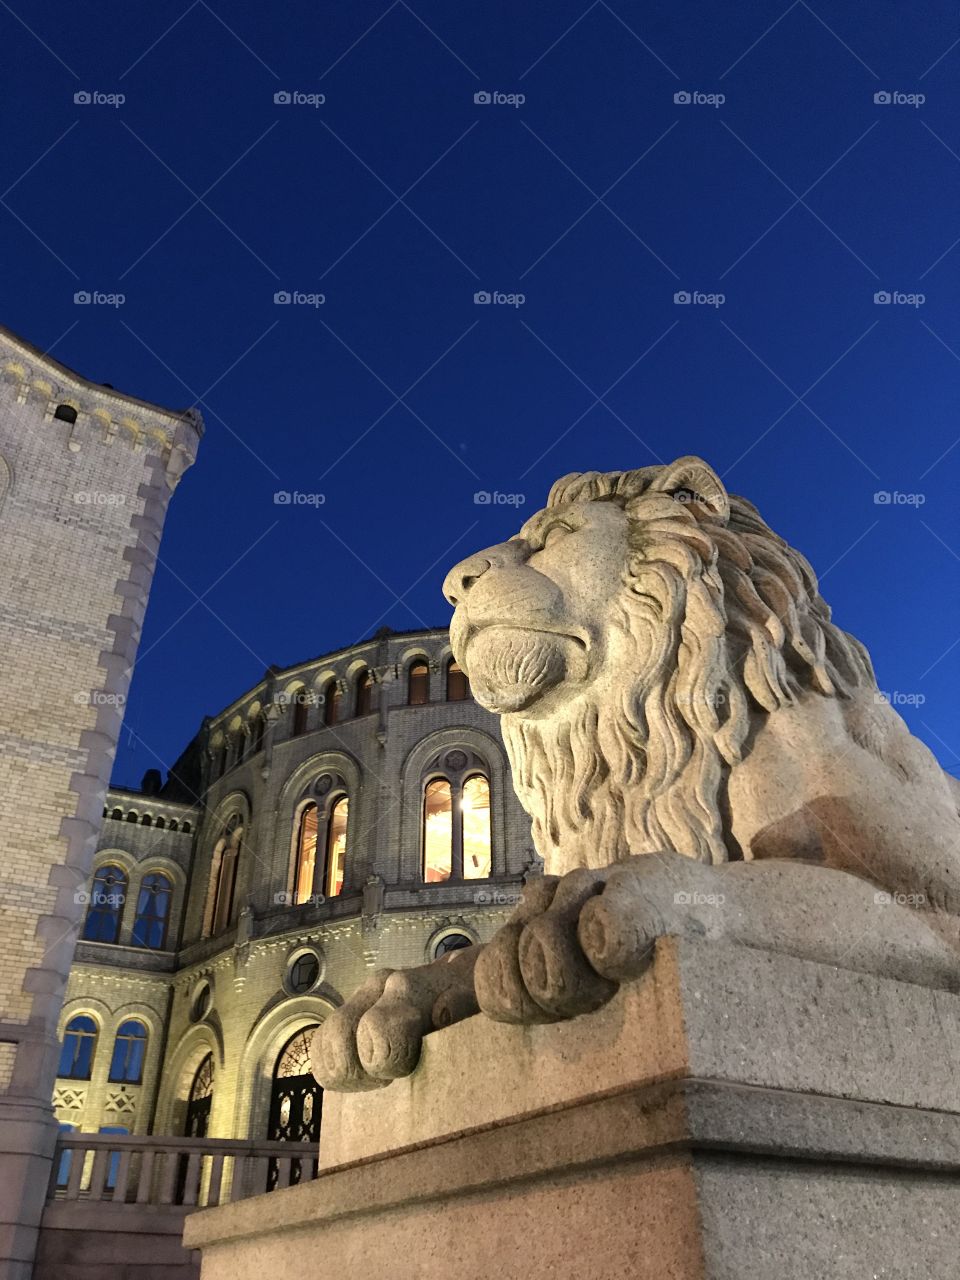 Lion infront of the Norwegian Parliament.